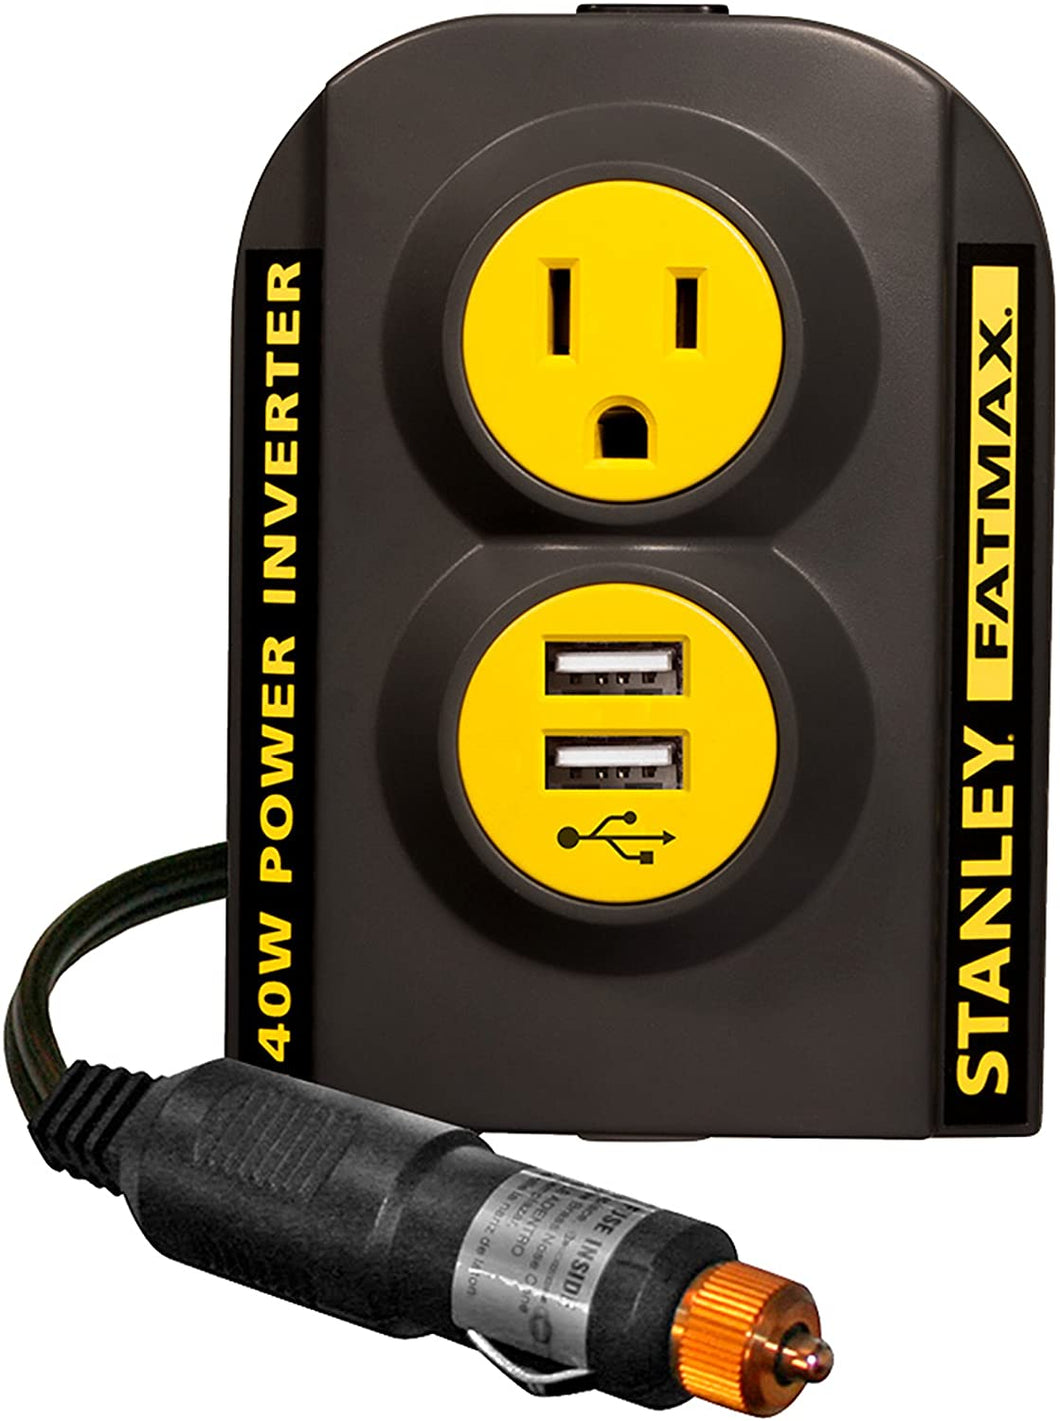 STANLEY FATMAX PCI140 140W Power Inverter: 12V DC to 120V AC Power Outlet with Dual USB Ports